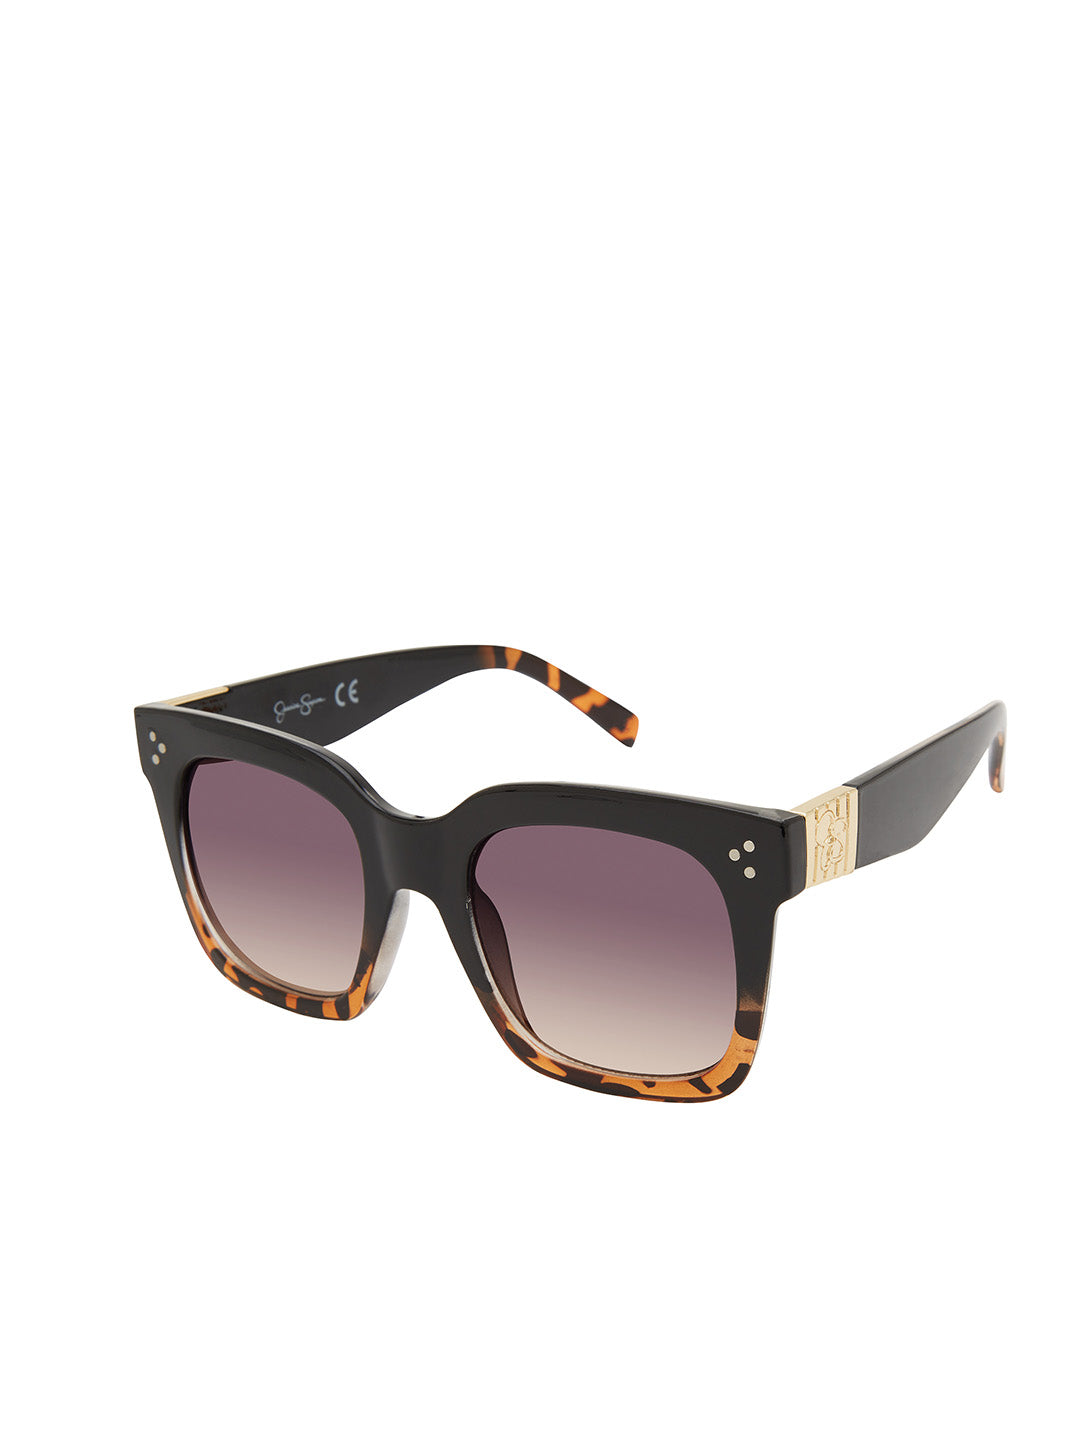 Stand-Out Cat-Eye Sunglasses in Black & Tortoise – Jessica Simpson